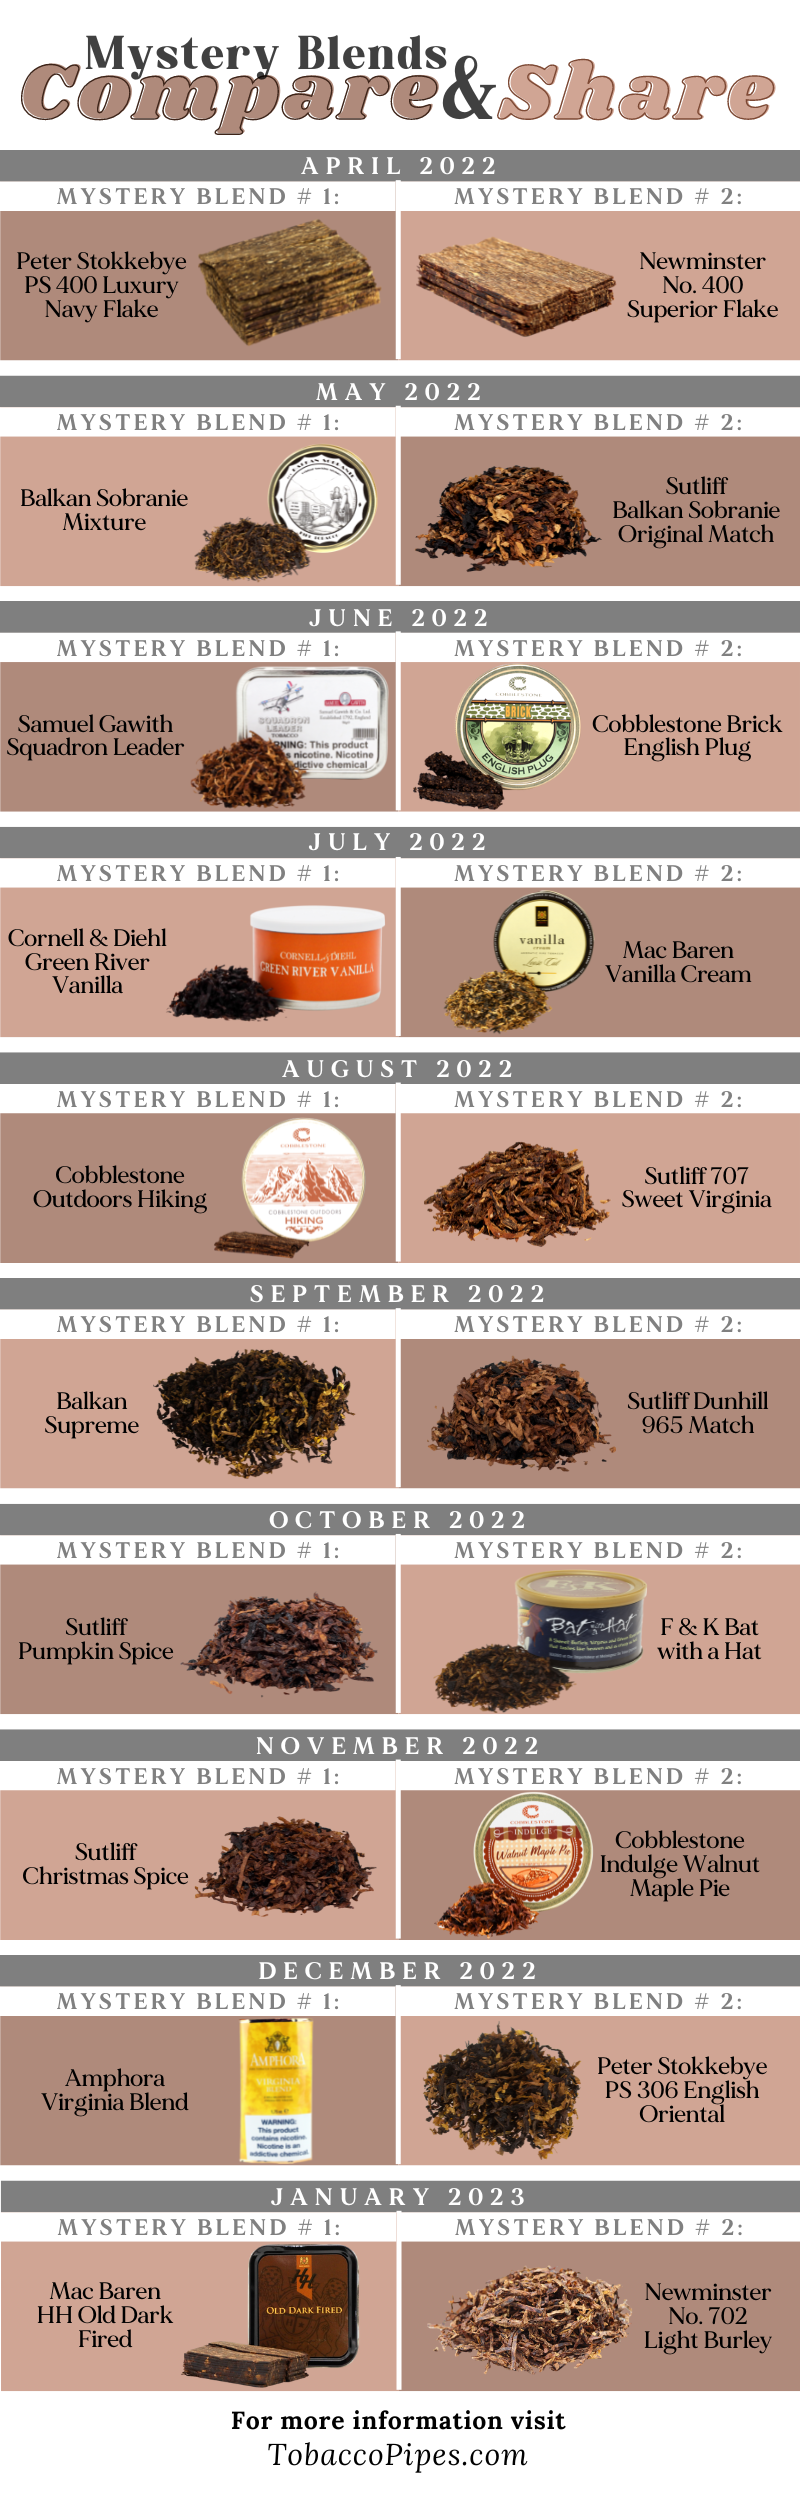 Compare & Share previous mystery blends